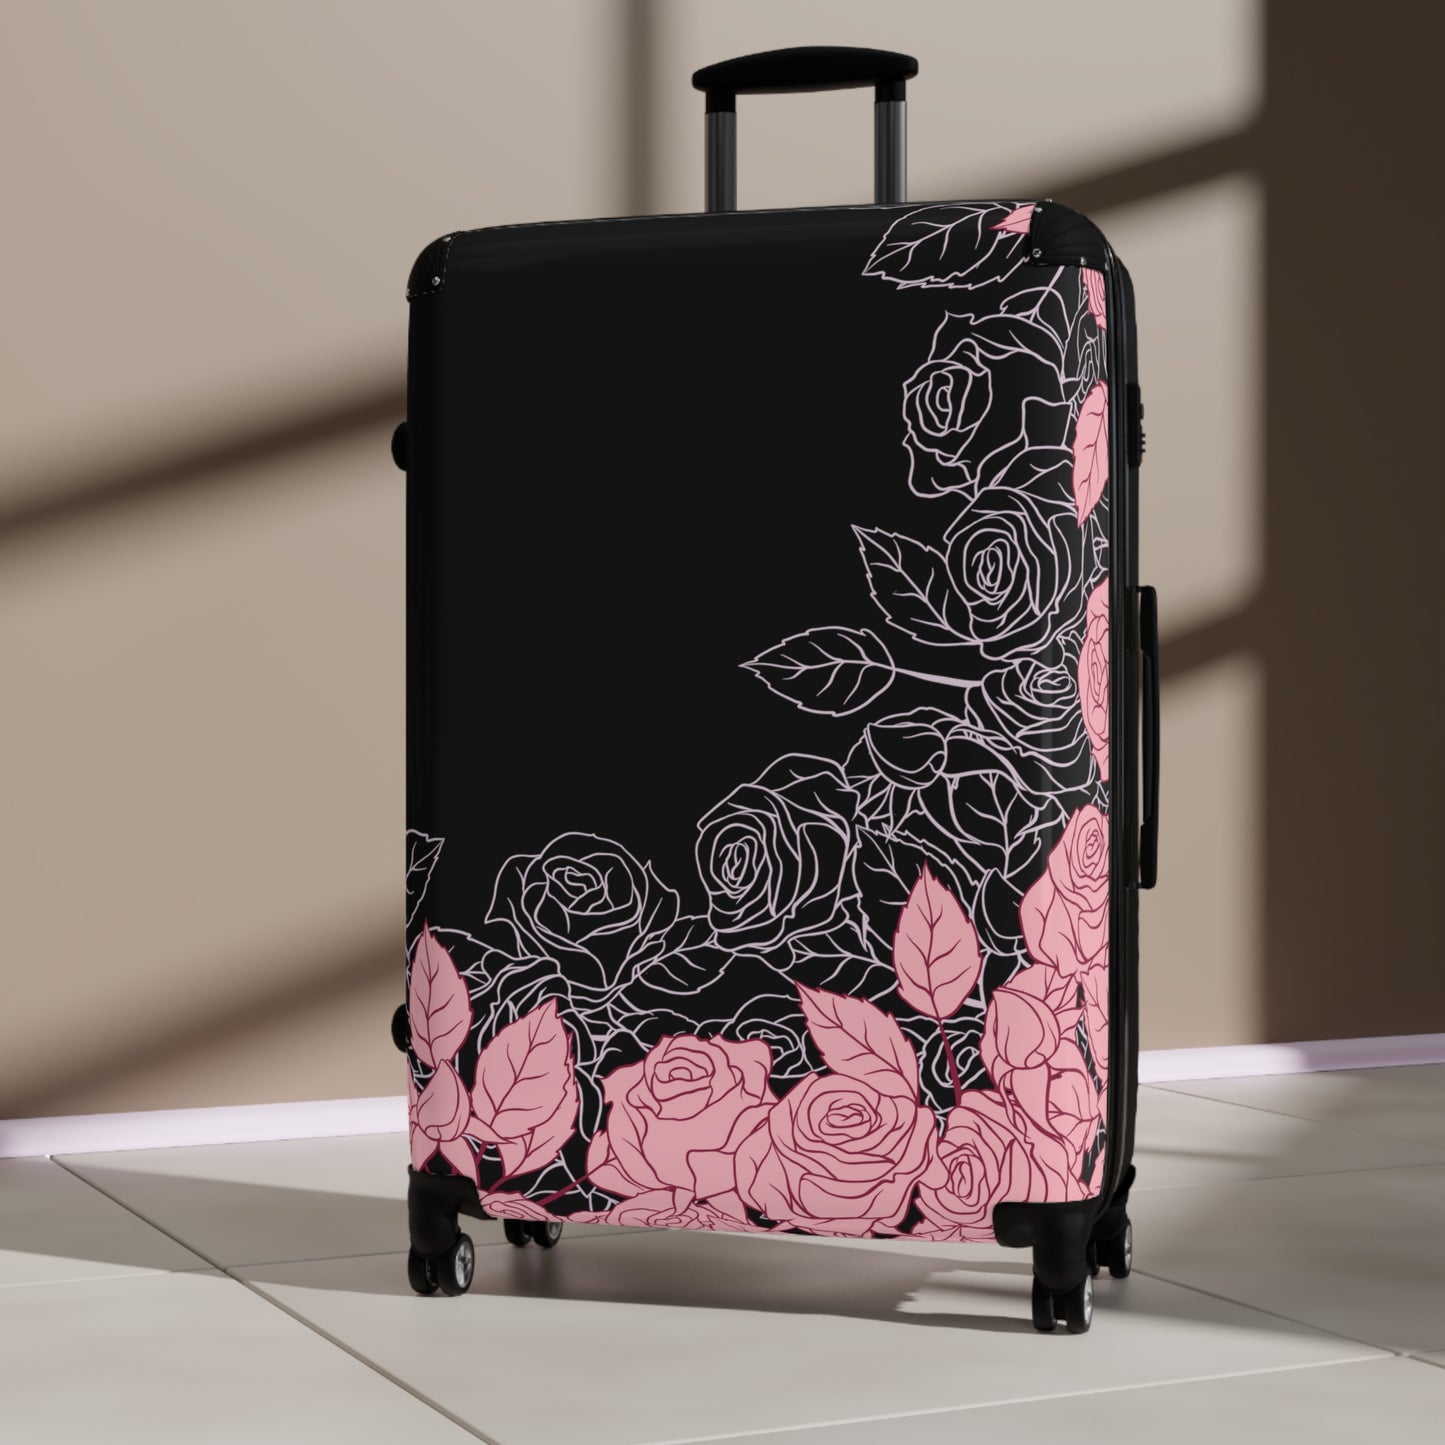 PINK ROSES SUITCASES Luggage By Artzira, All Sizes, Artistic Designs, Double Wheeled Spinner